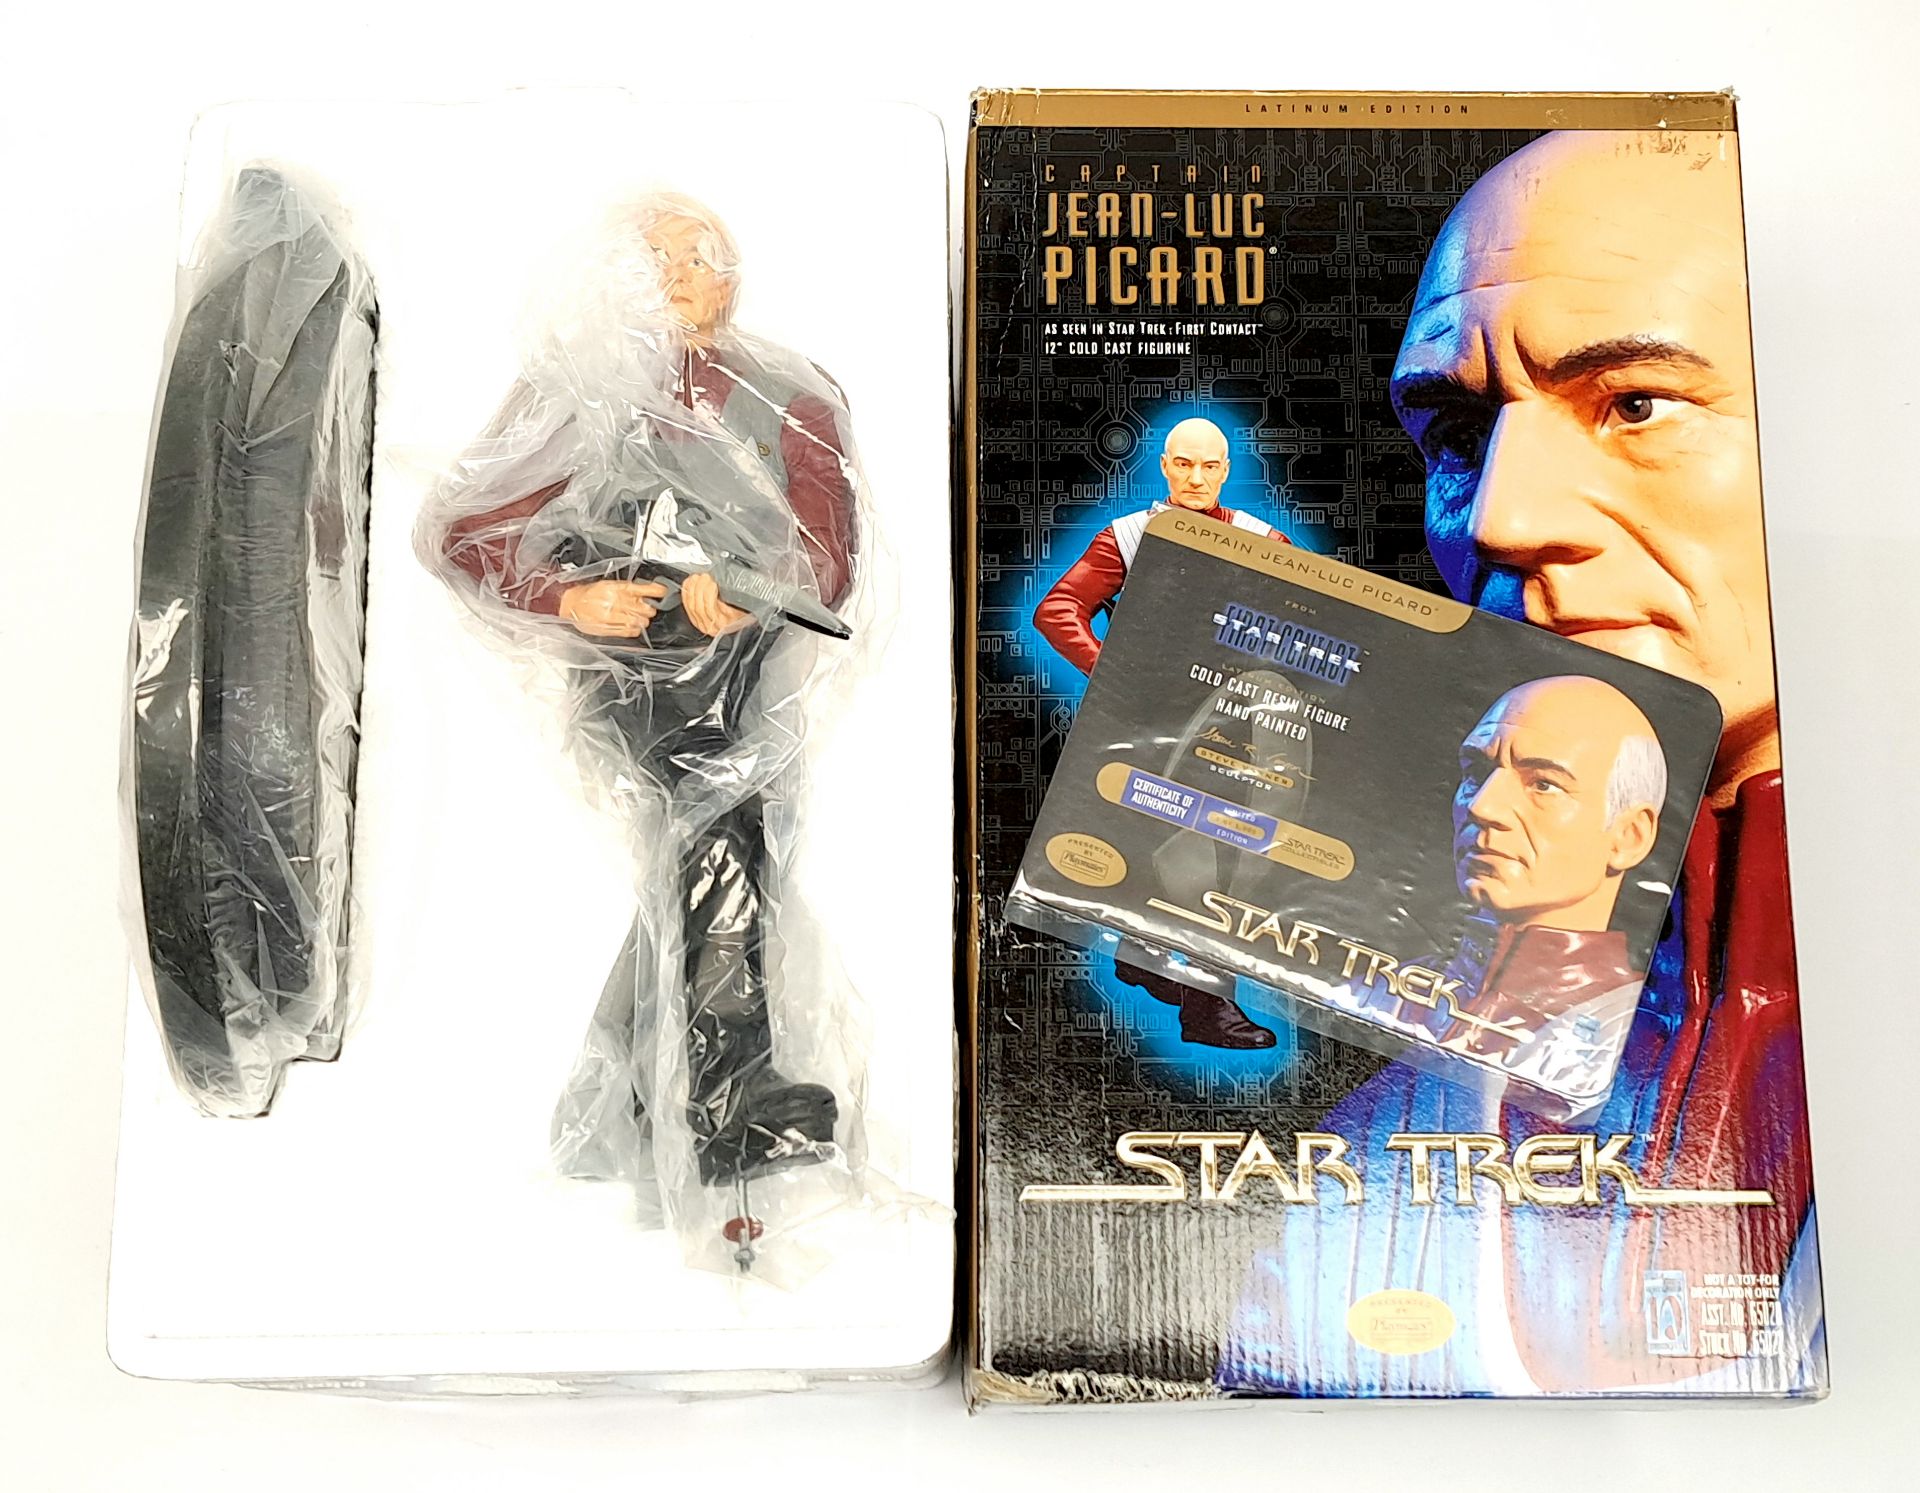 Playmates Star Trek First Contact Captain Jean-Luc Picard Cold Cast Resin 12" Figurine - Image 2 of 2